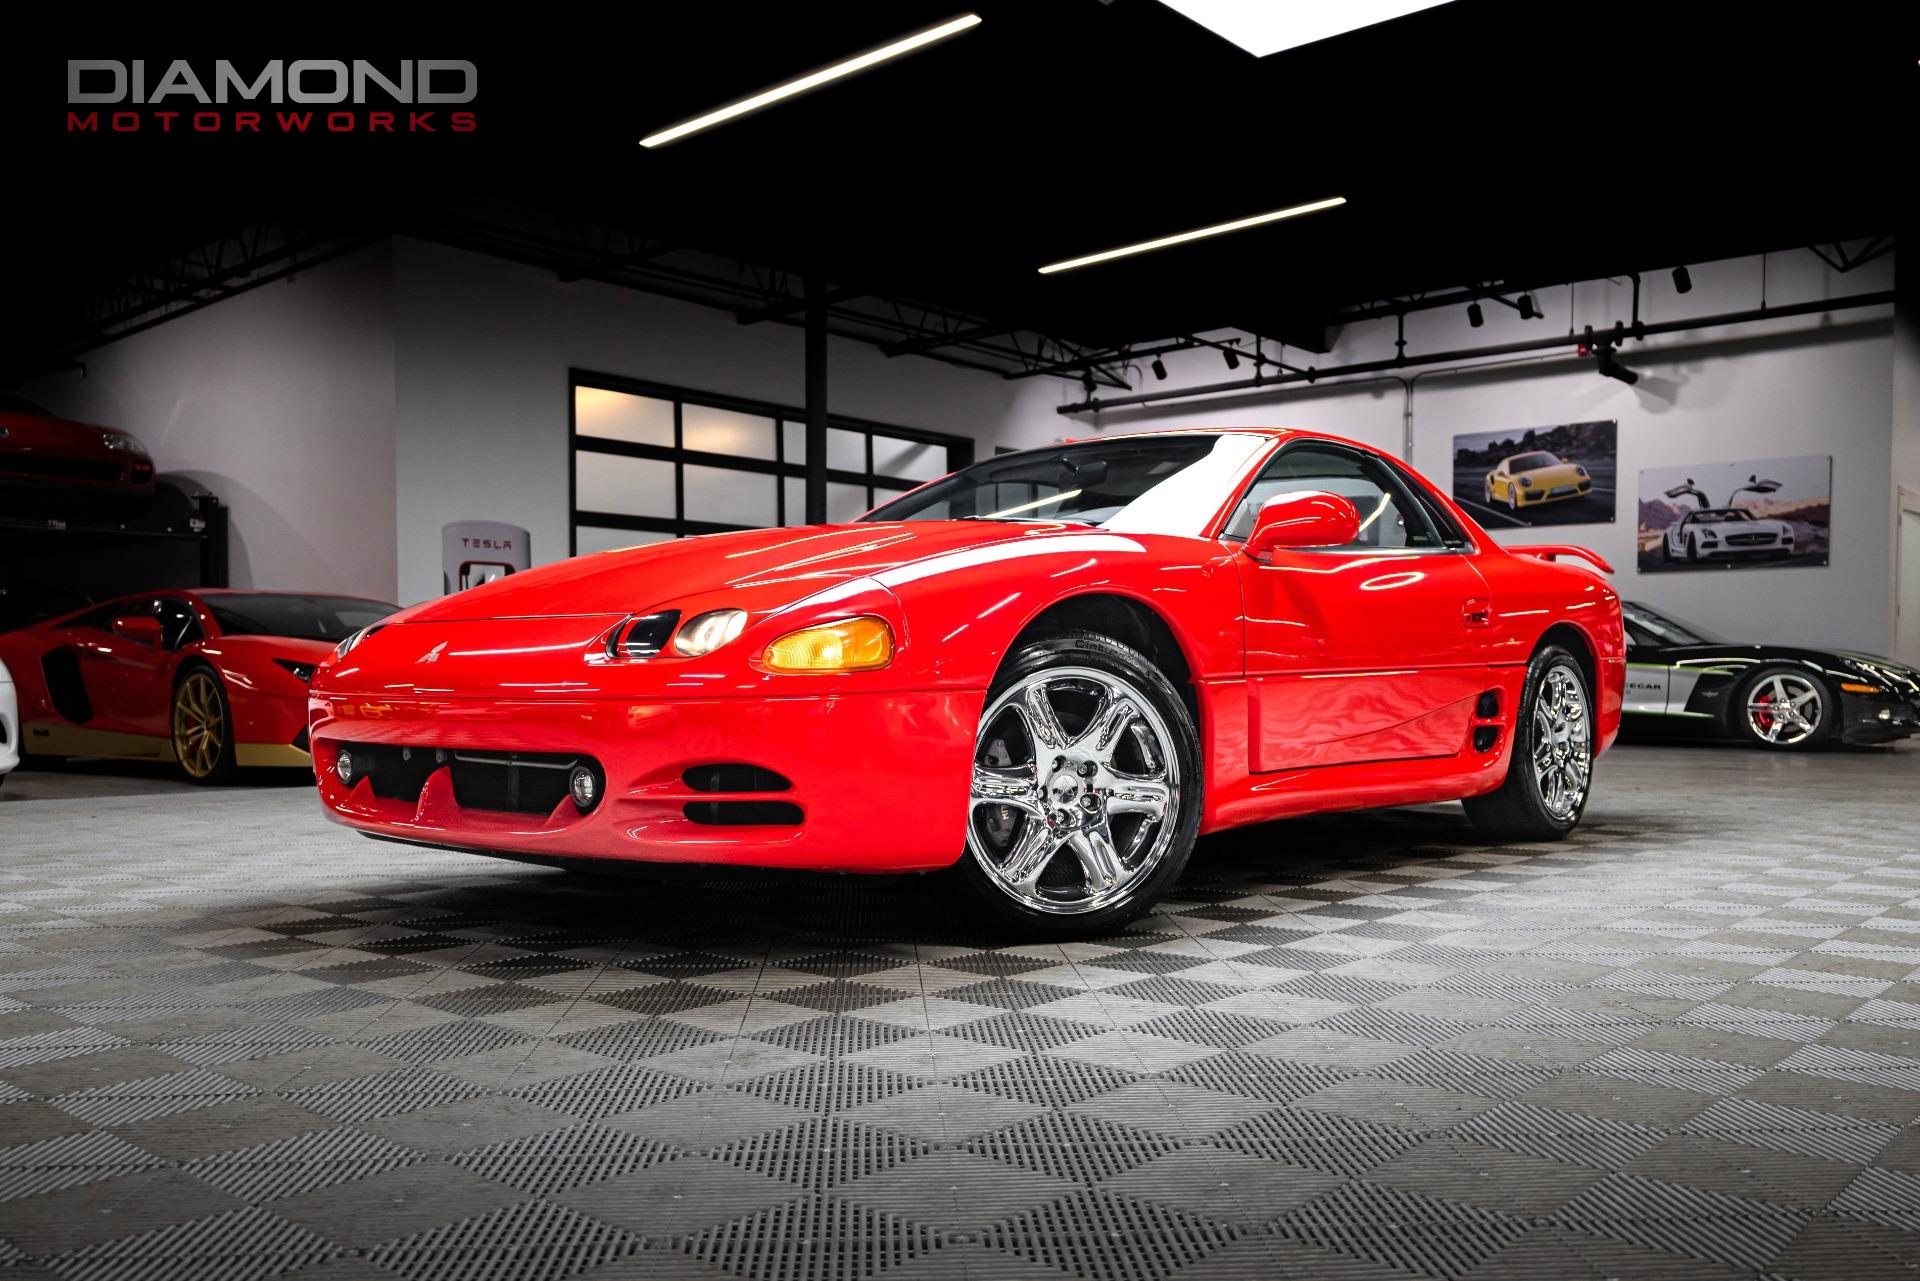 Used 1995 Mitsubishi 3000GT VR-4 Turbo For Sale (Sold 